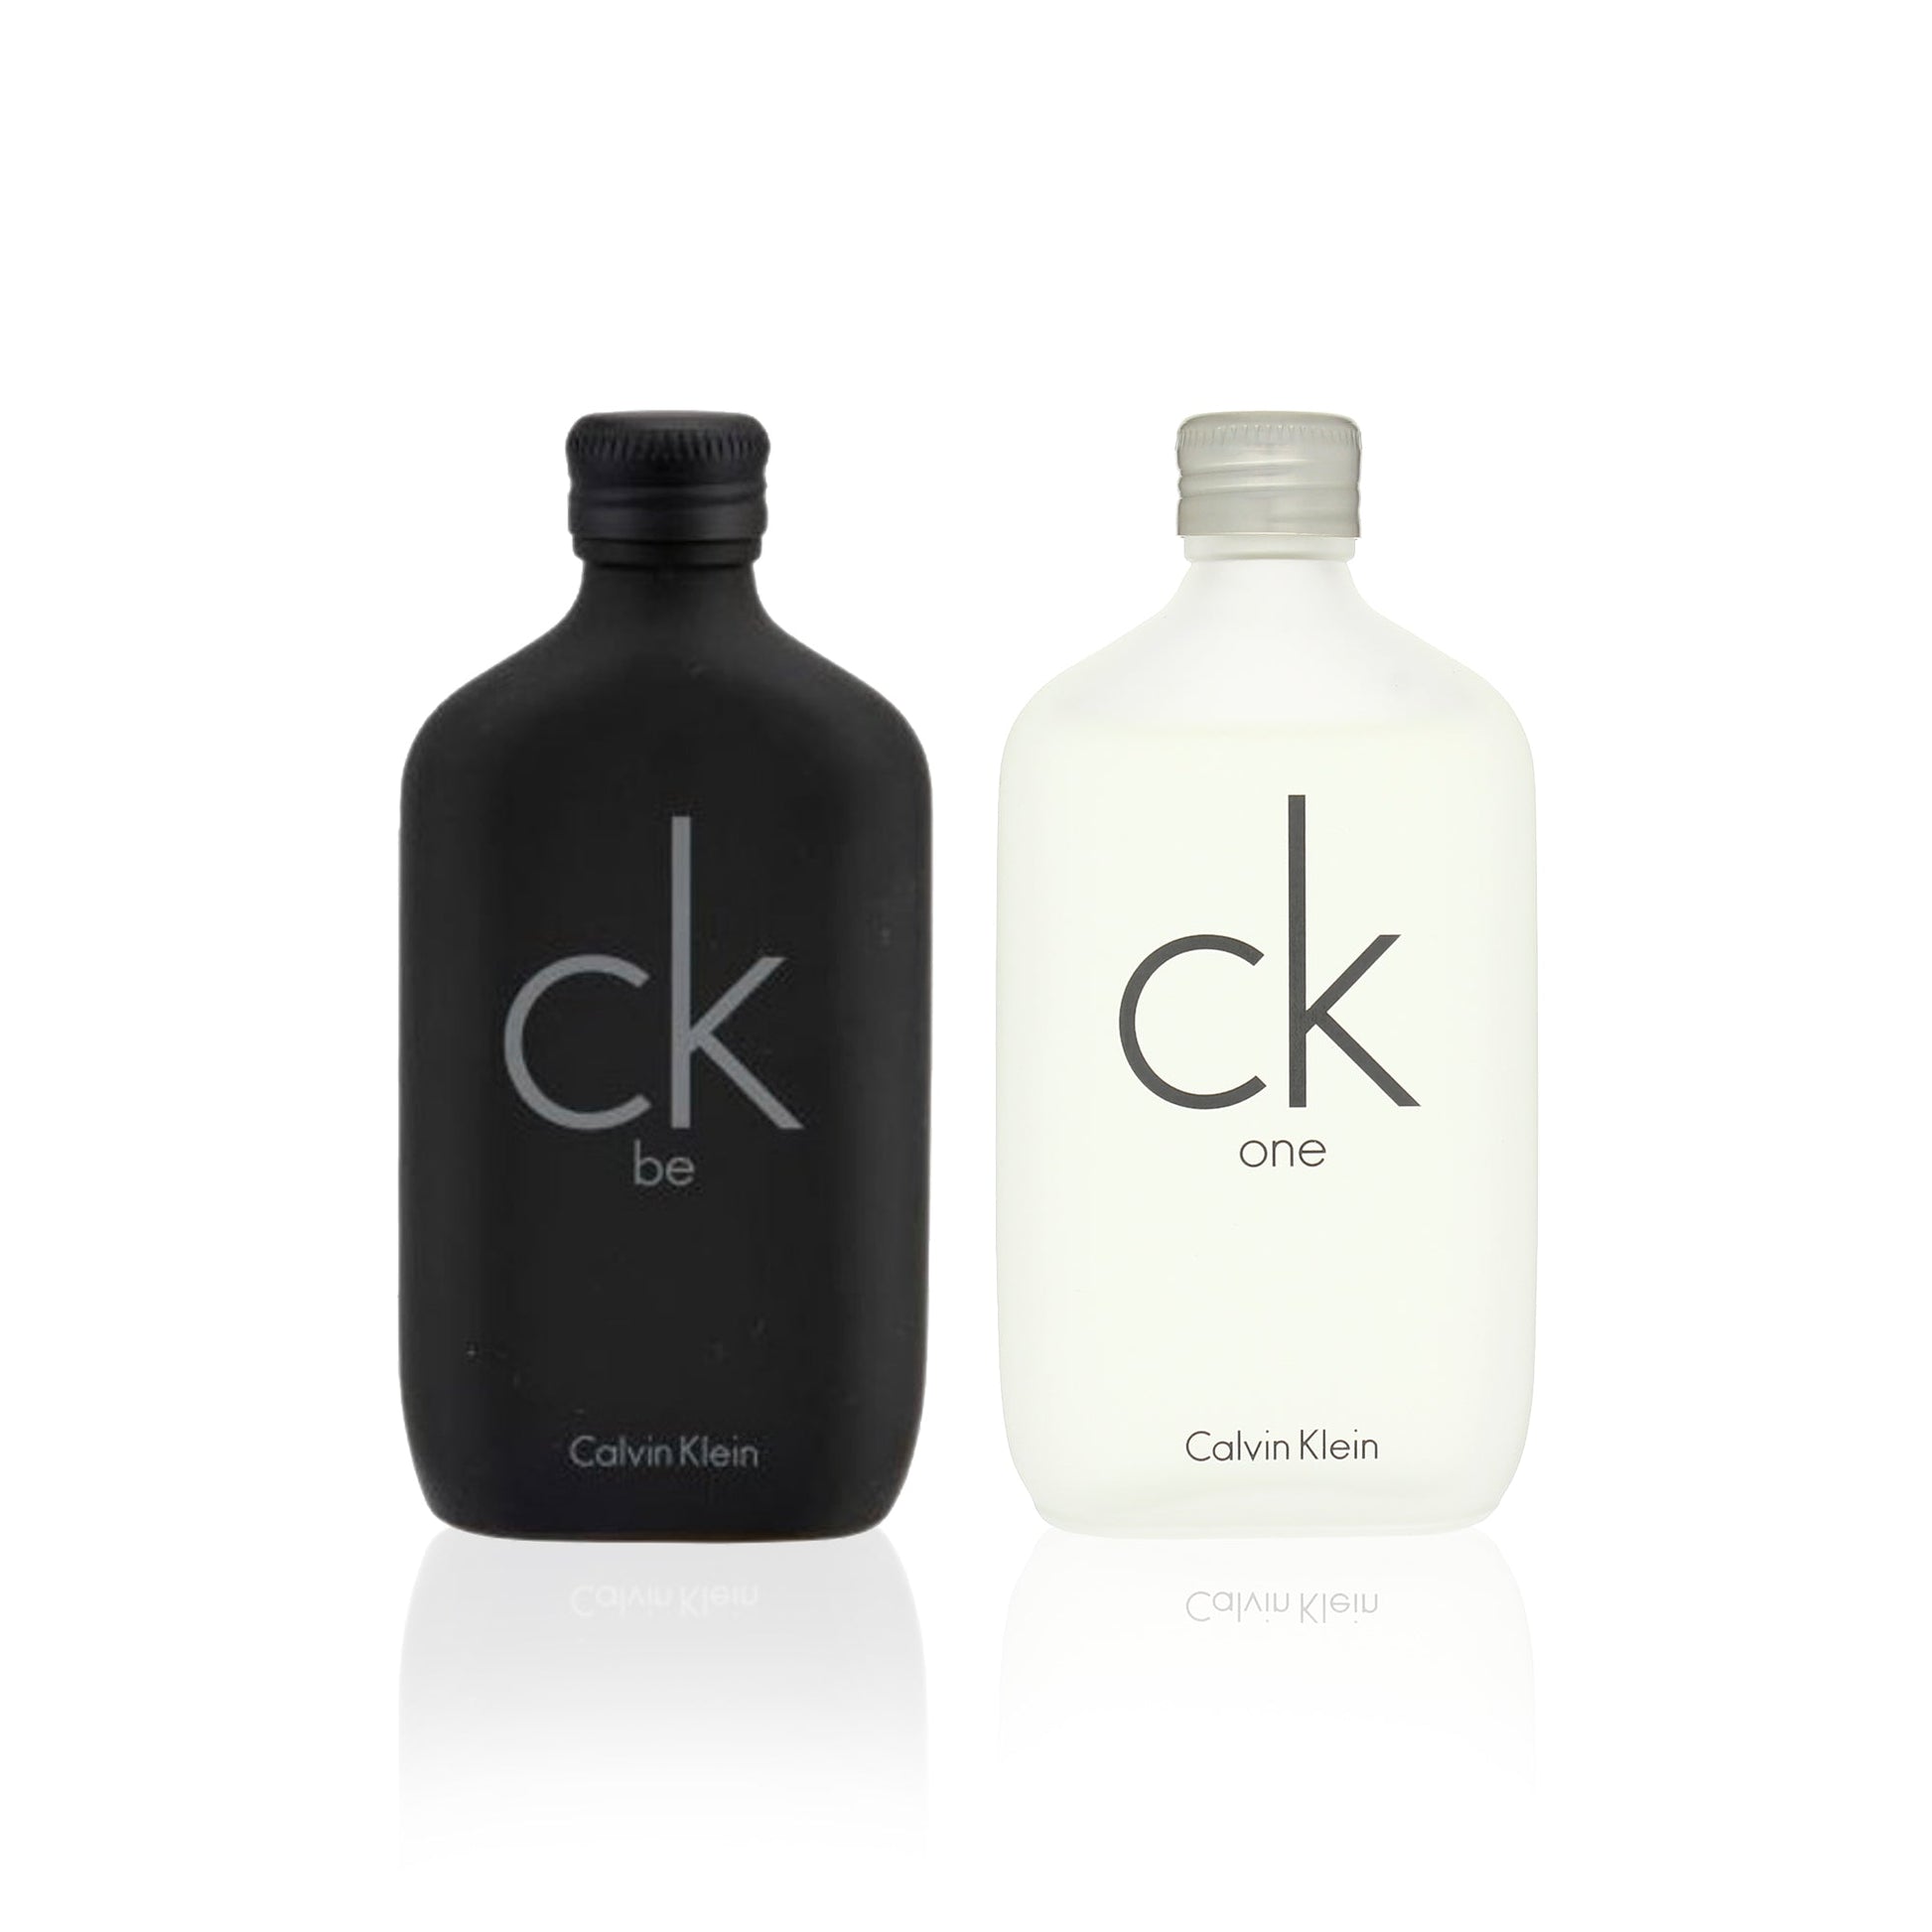 Bundle Deal His & Hers: Be by Calvin Klein and One by Calvin Klein, Product image 1